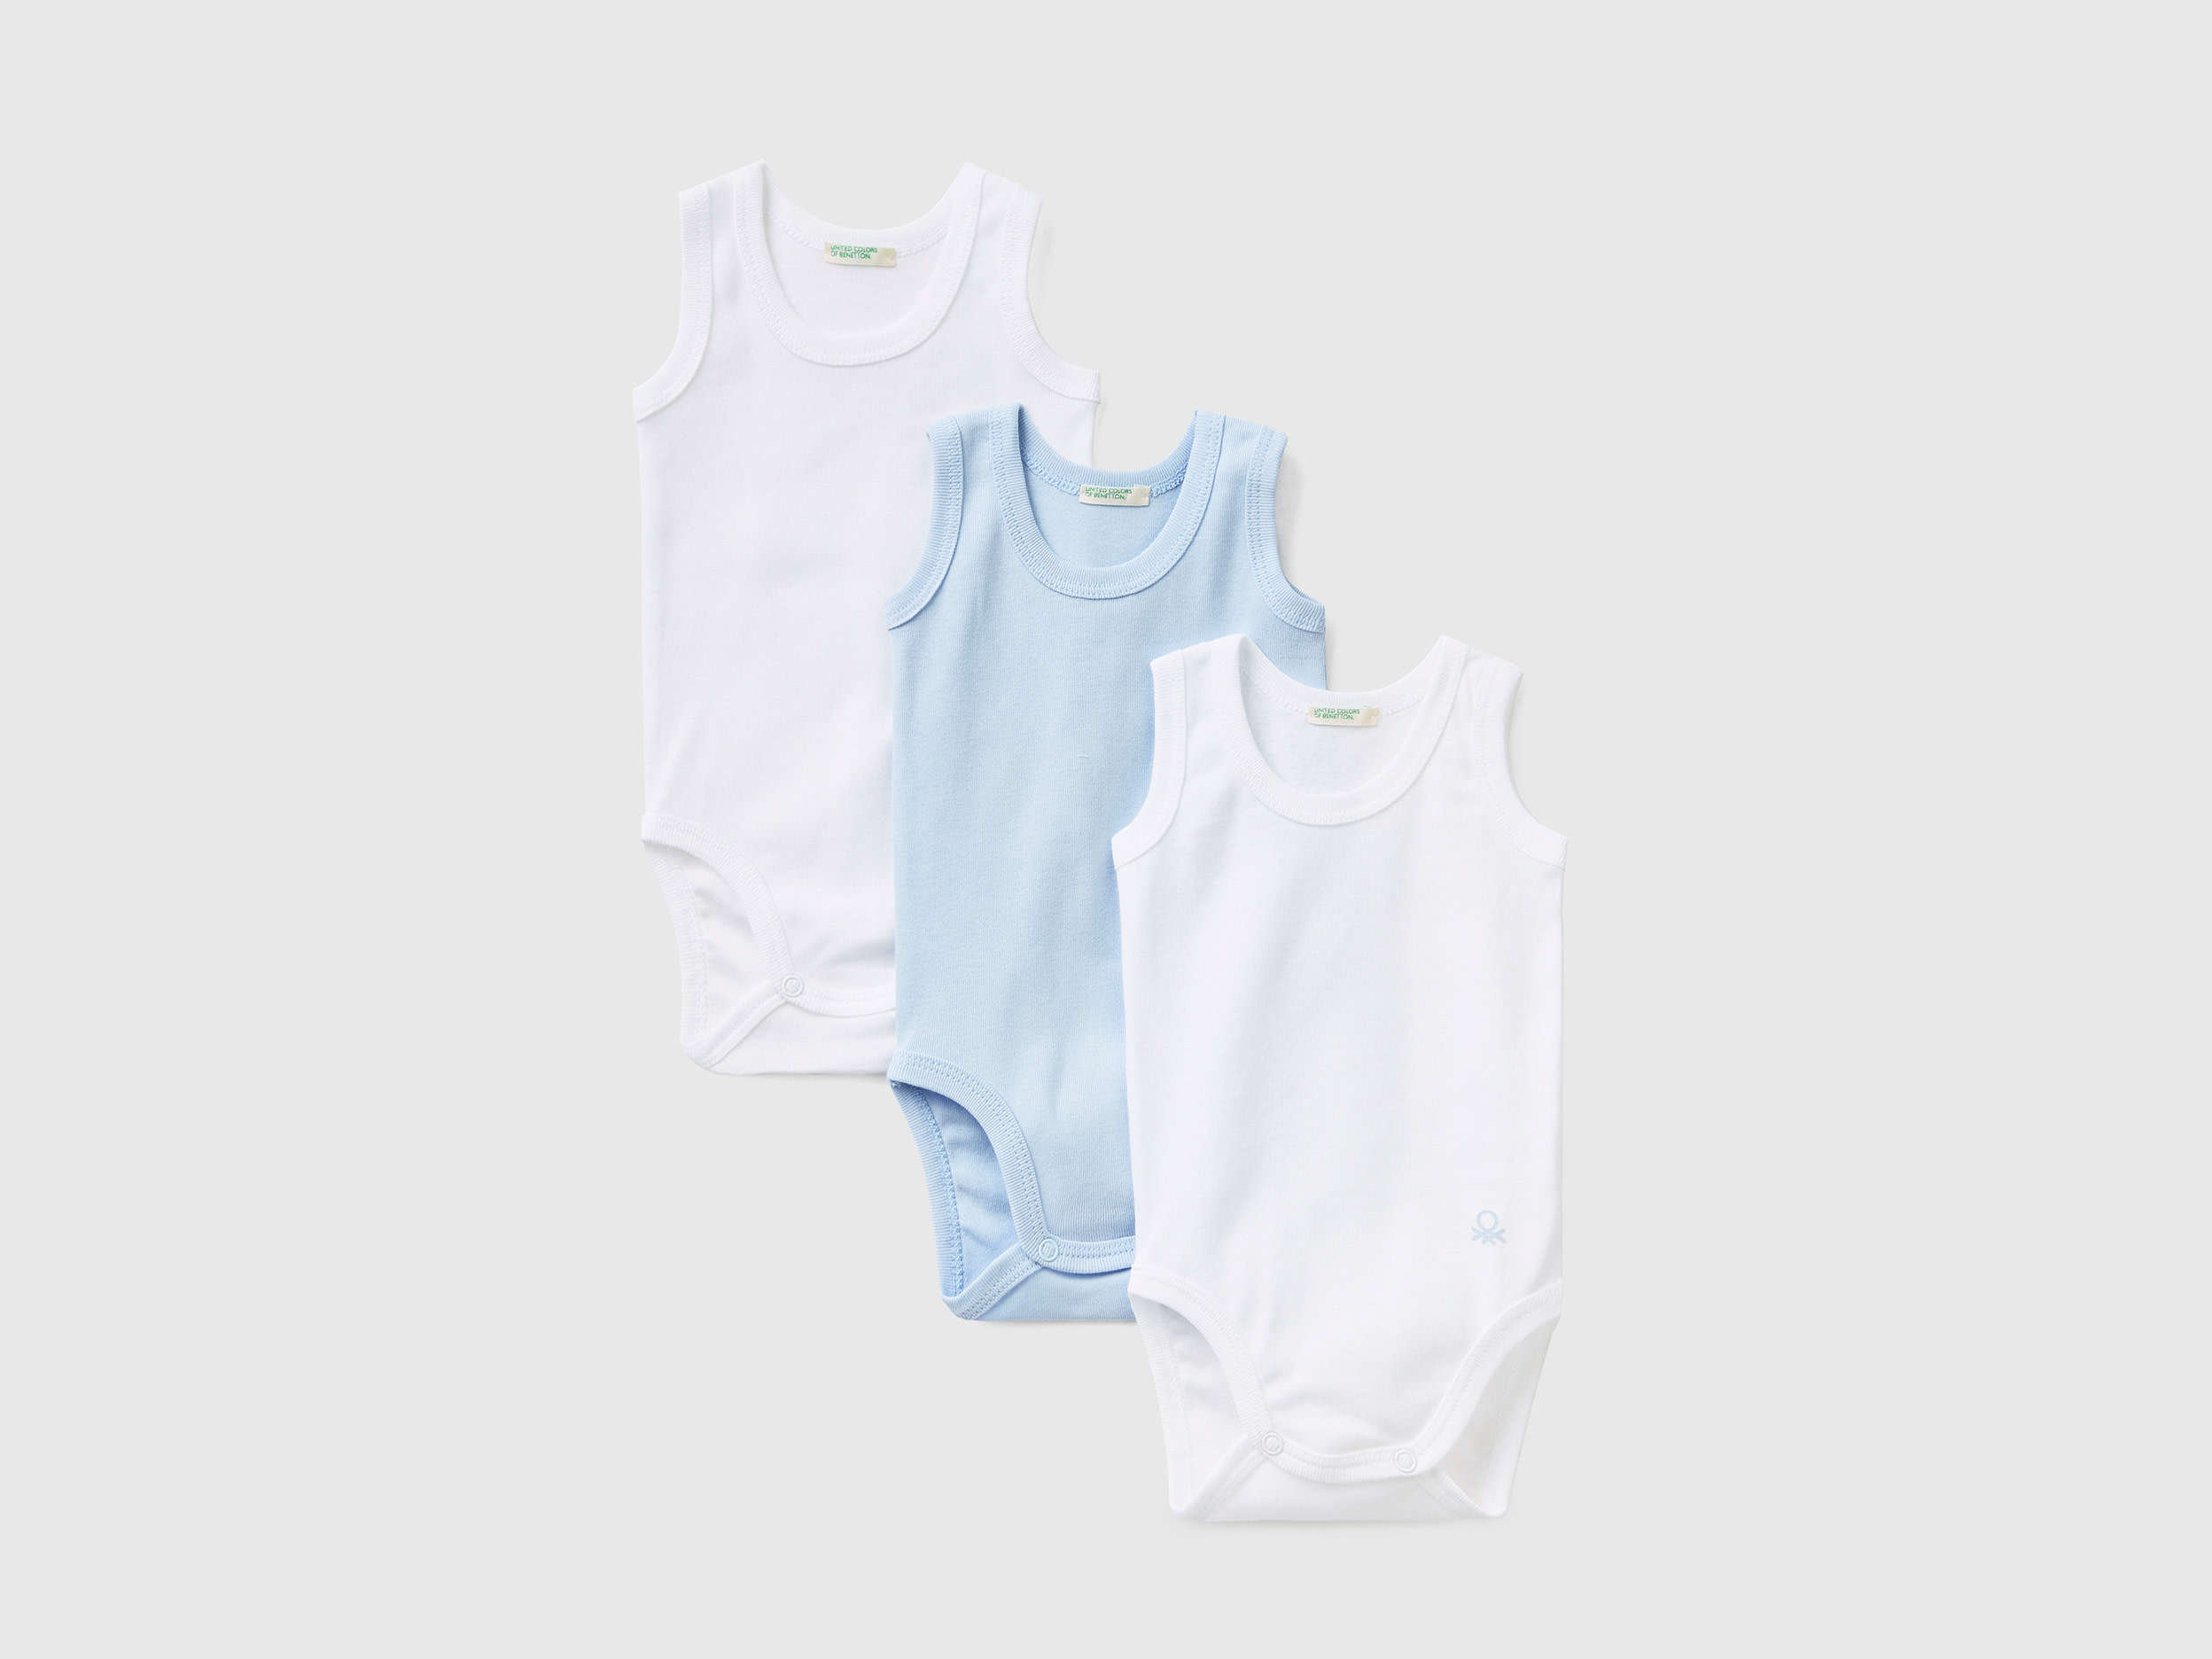 Image of Benetton, Three Solid Color Tank Top Bodysuits, size 50, Light Blue, Kids